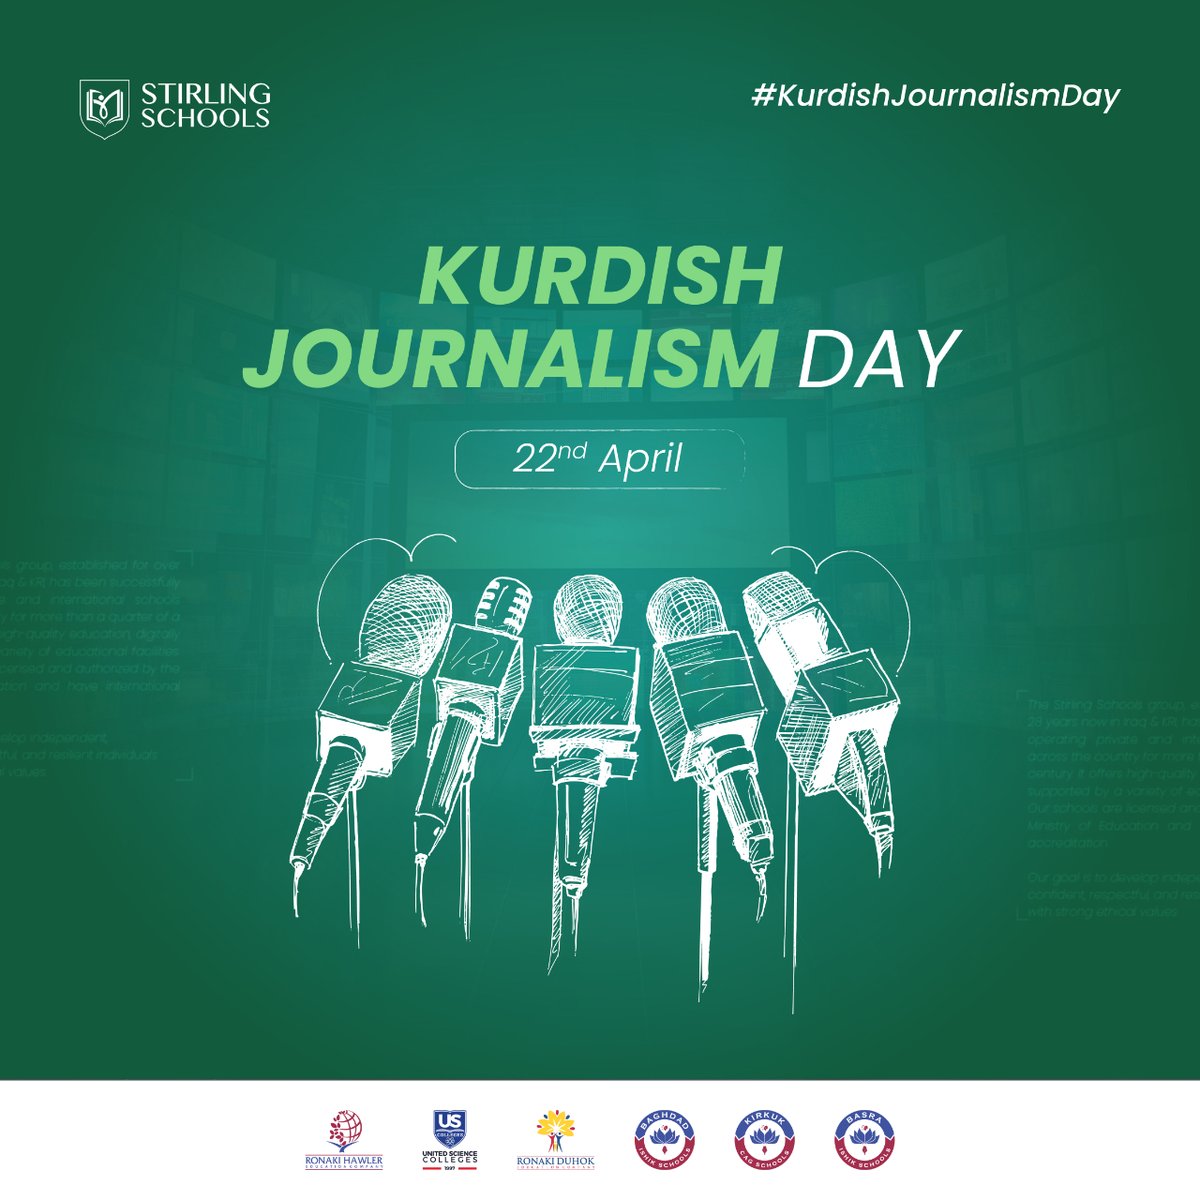 Kurdish Journalism Day

On this Kurdish Journalism Day, United Science Colleges pay tribute to the courageous journalists who dedicate their lives to proclaiming and empowering our communities.

#United_Science_Colleges #KurdishJournalismDay